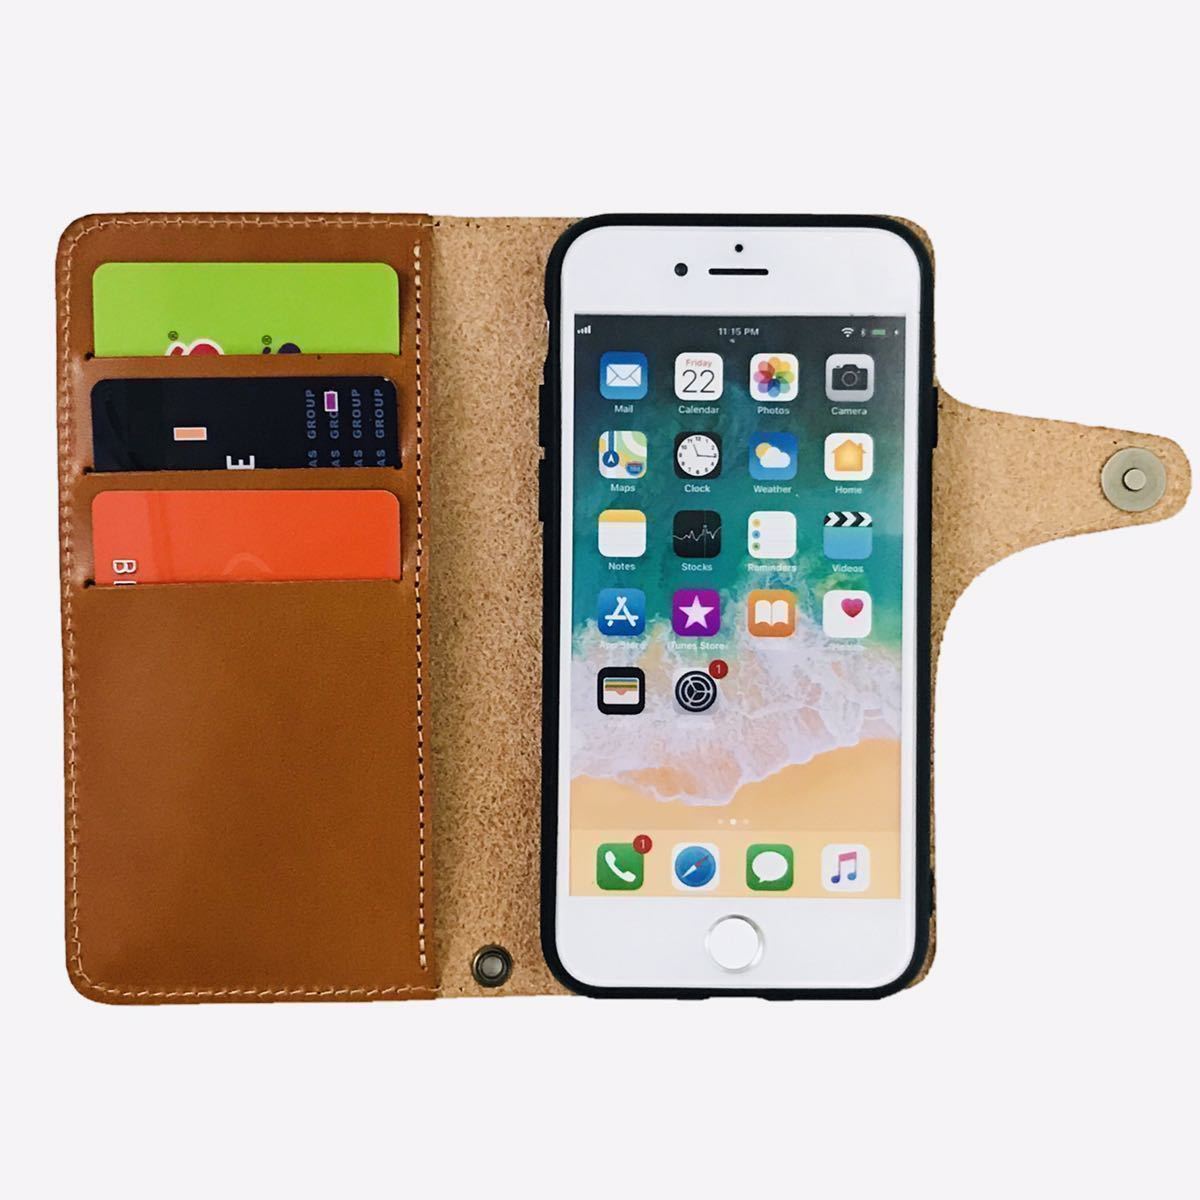 * Tochigi leather iPhone14 Plus cow leather smartphone case notebook type cover original leather leather Brown vo- Noah two wheels made in Japan *